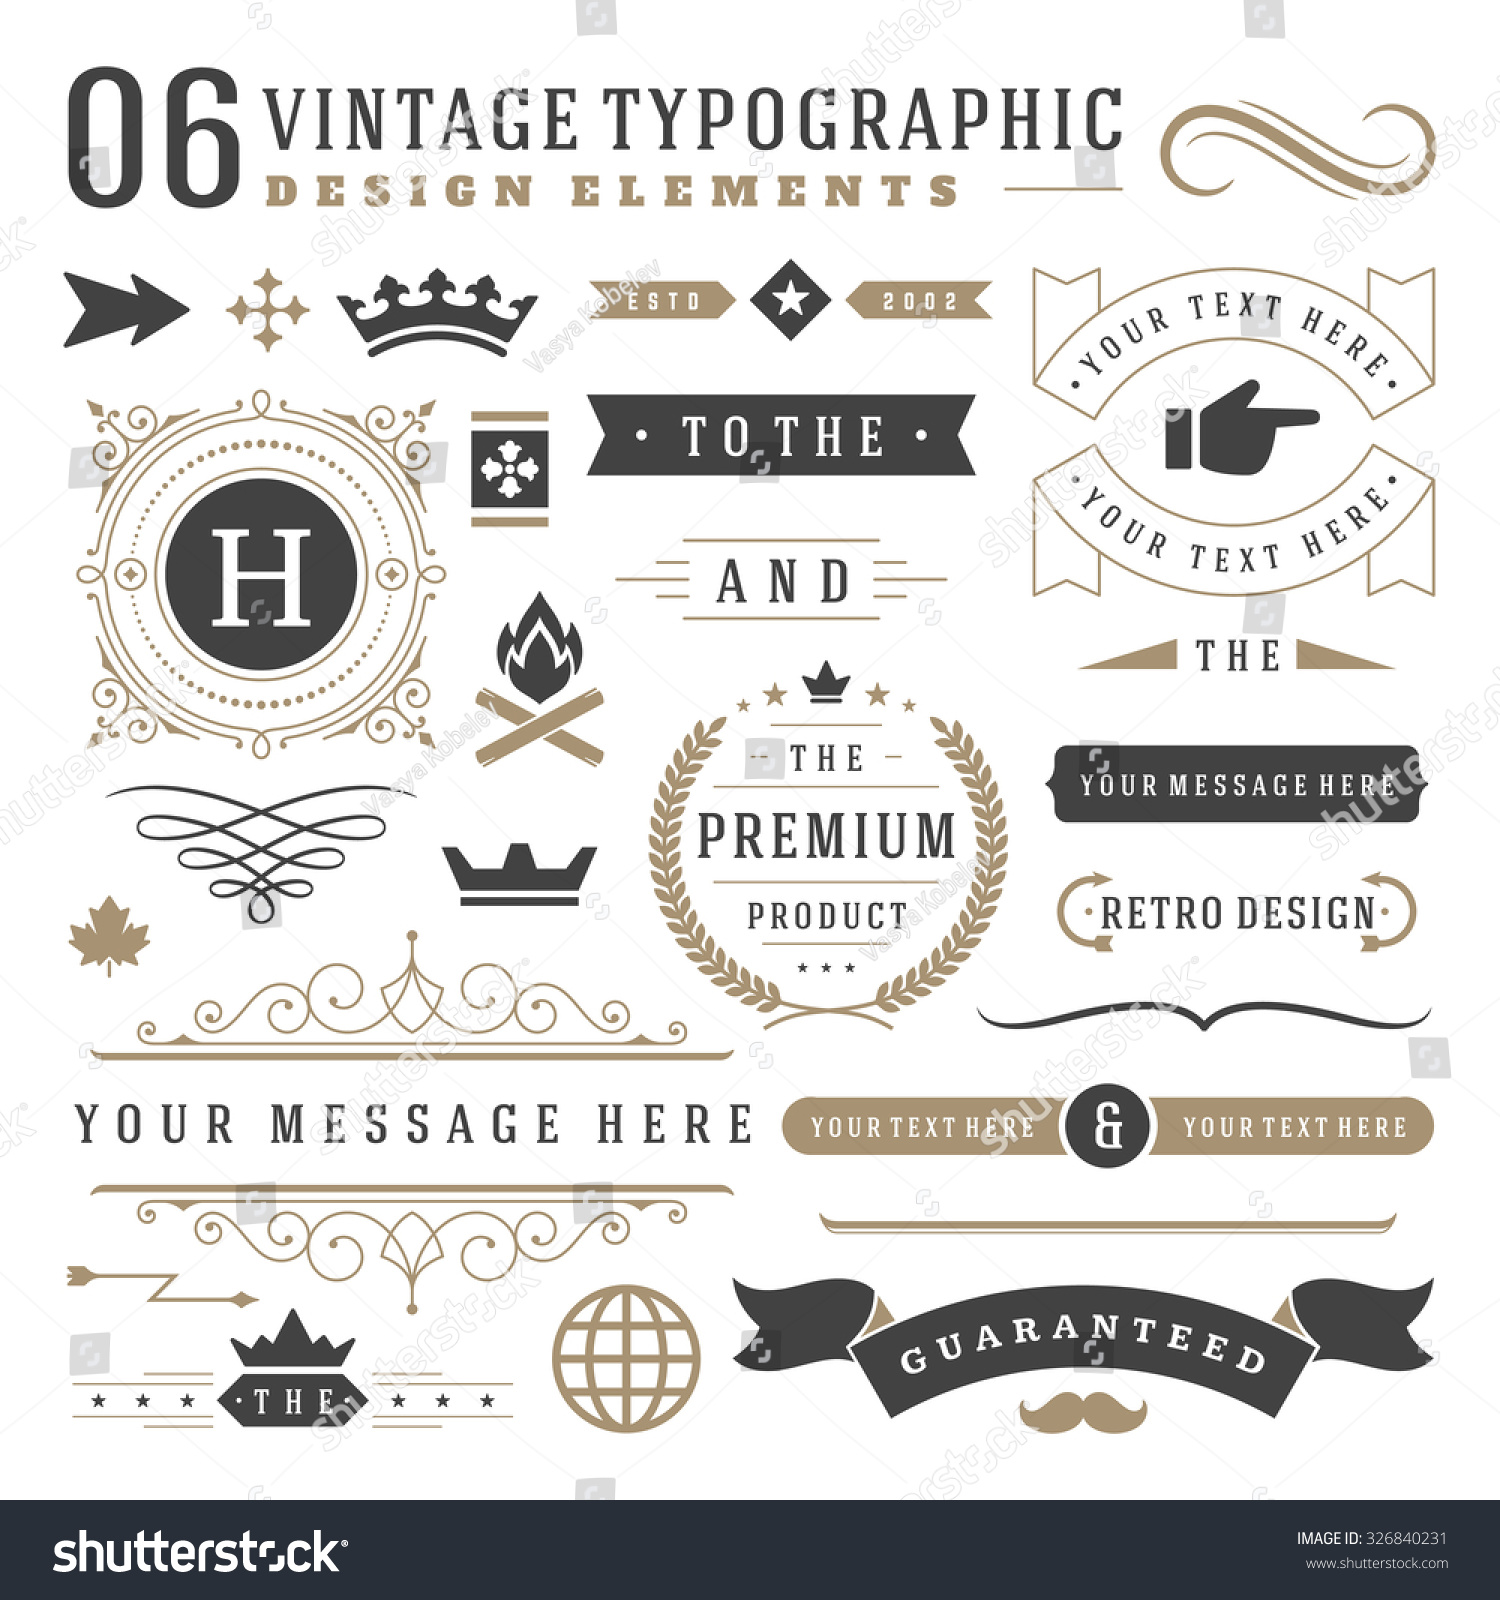 Retro vintage typographic design elements. Arrows, labels, ribbons, logos symbols, crowns, calligraphy swirls, ornaments and other. #326840231